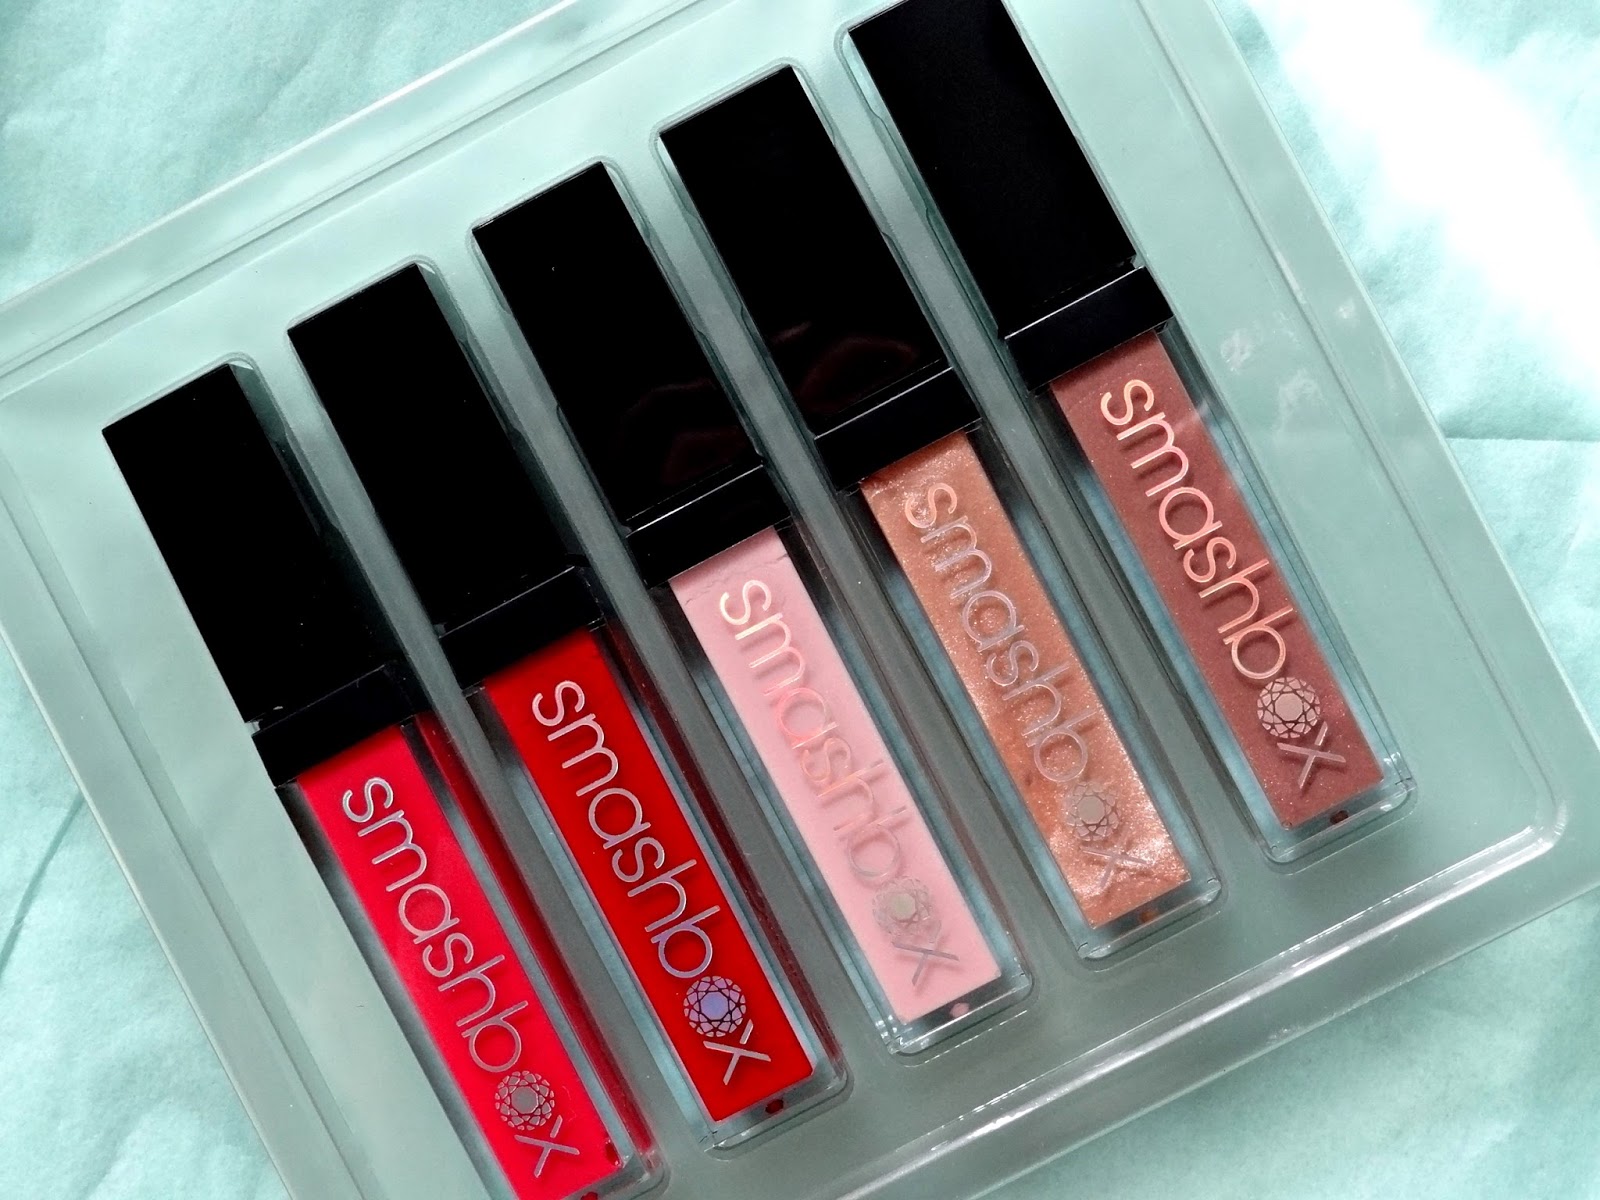 Smashbox On the Rocks Be legendary Lip gloss Set Smashbox Holiday 2014 Limited Edition Review, Photos & Swatches